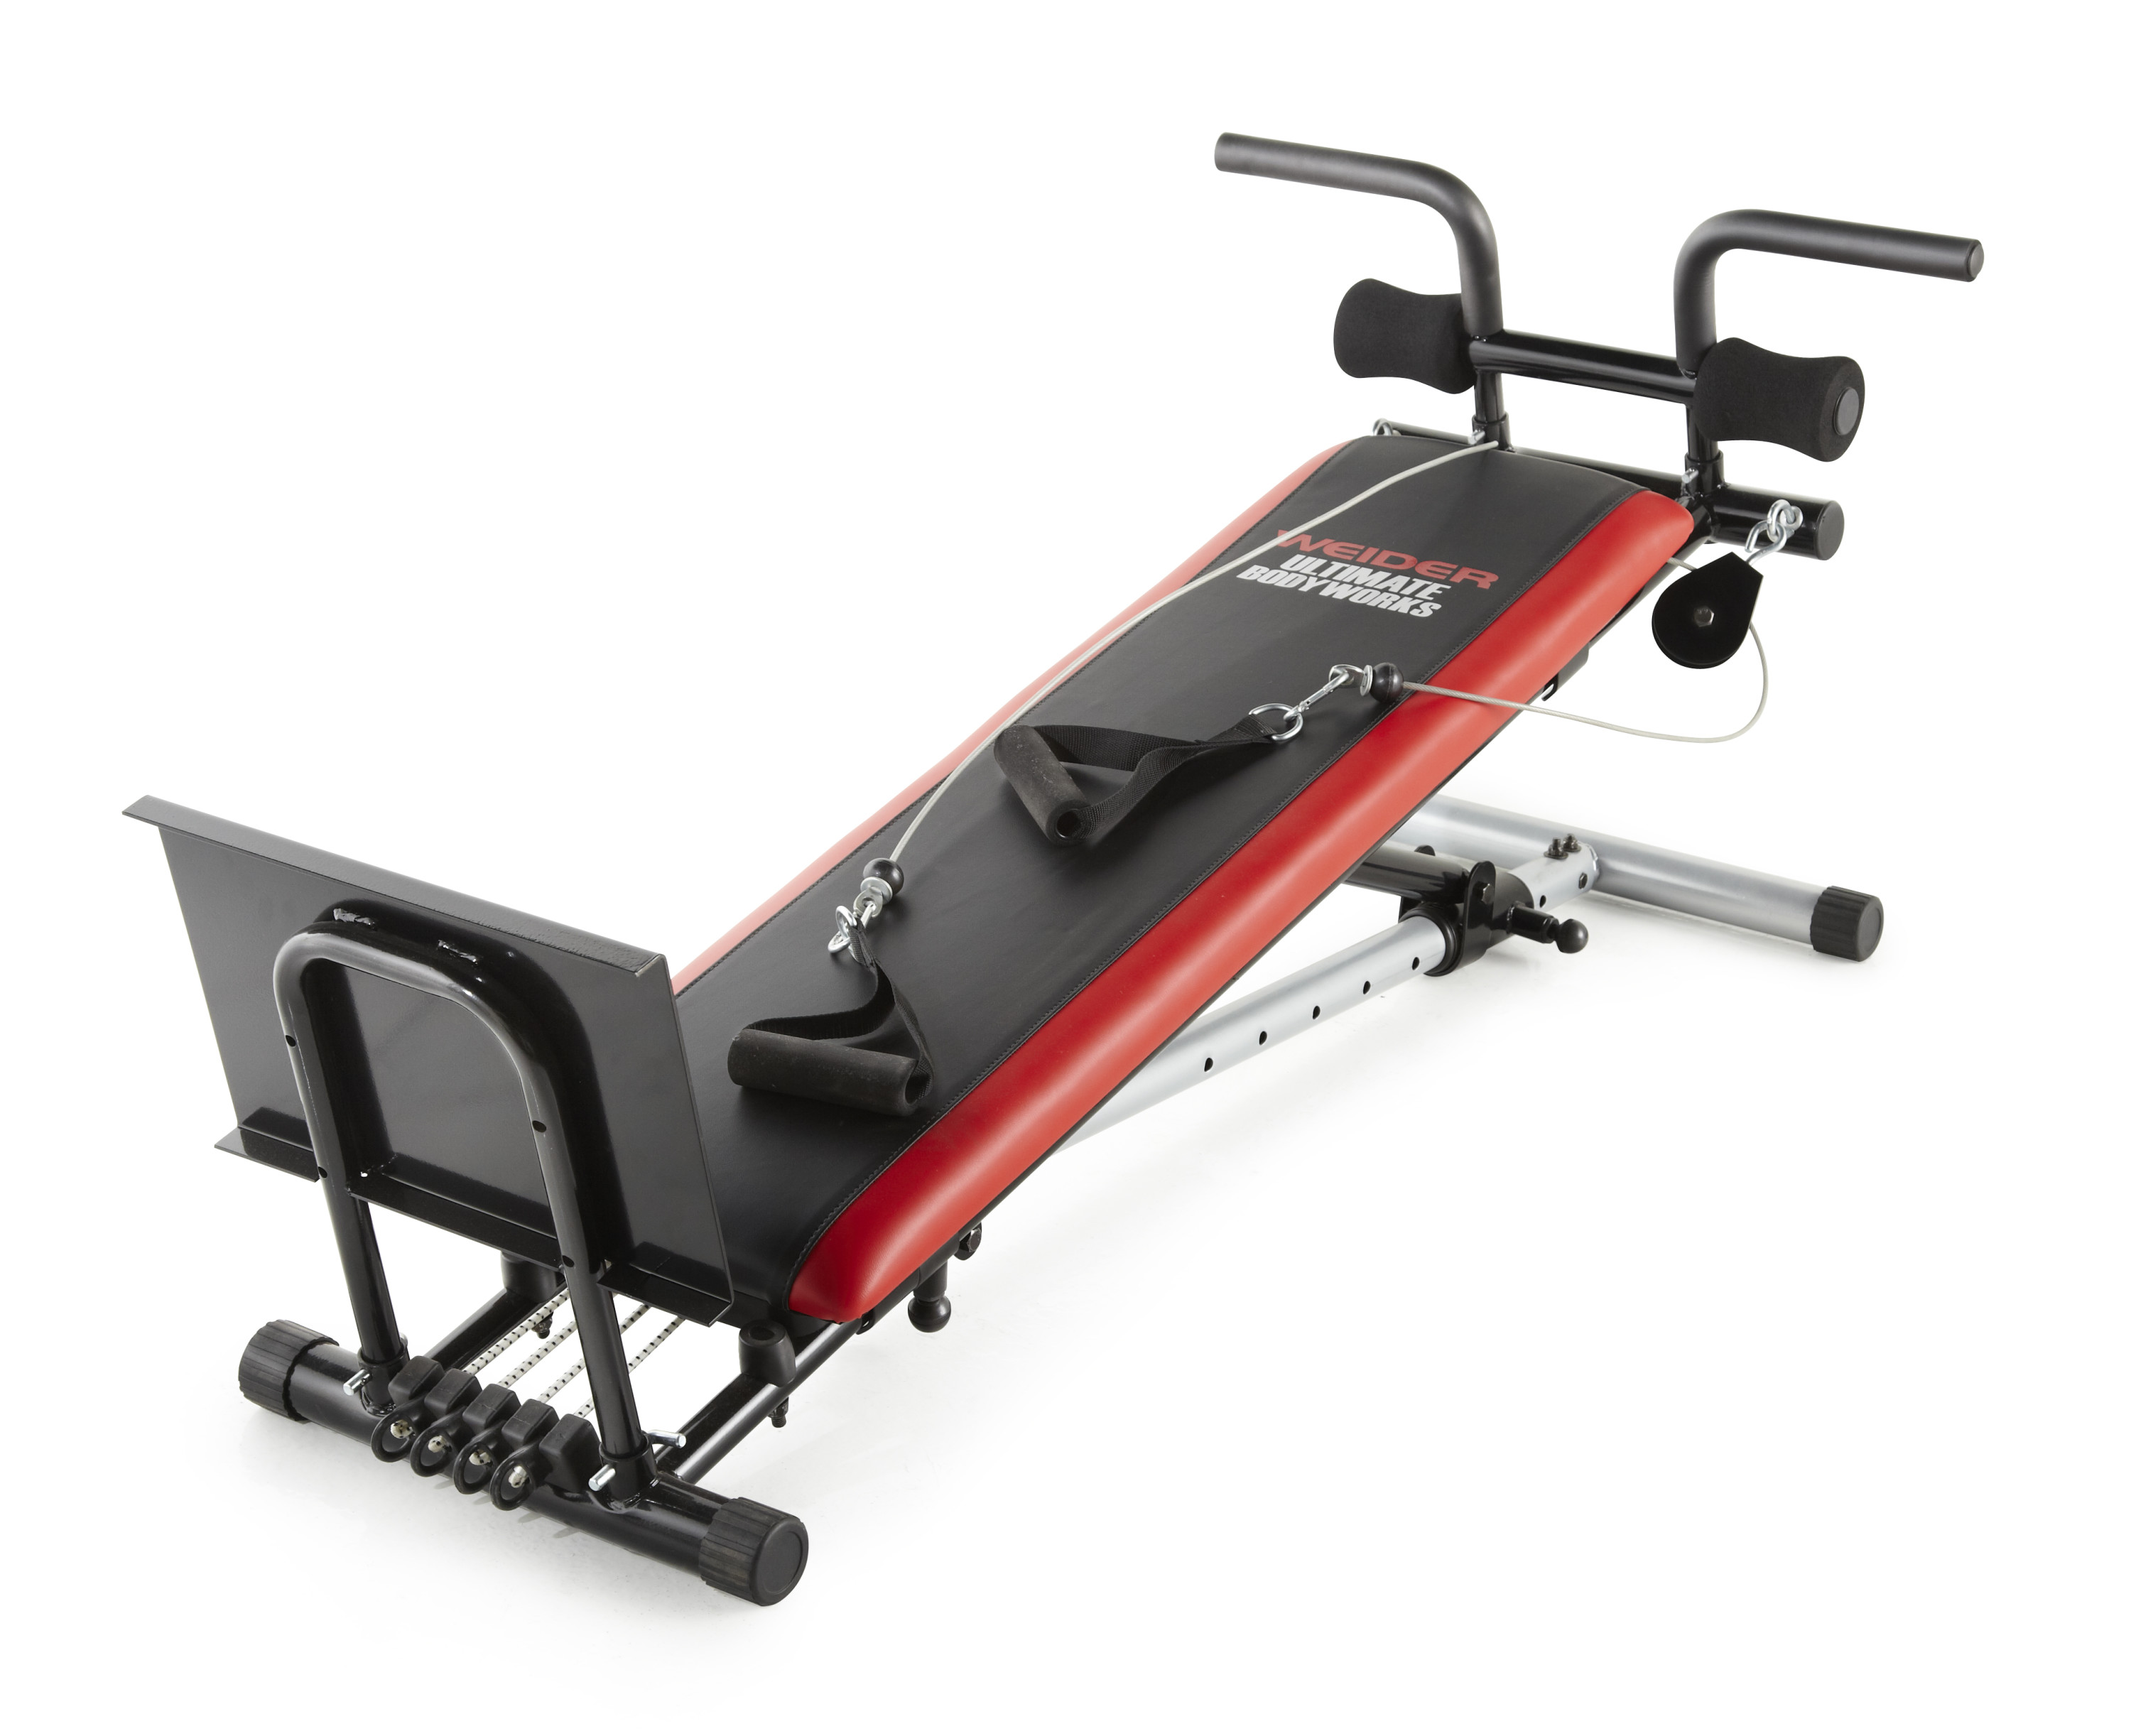 Weider Ultimate Total Body Works Indoor Home Workout Fitness Machine | WEBE15911 - image 1 of 24